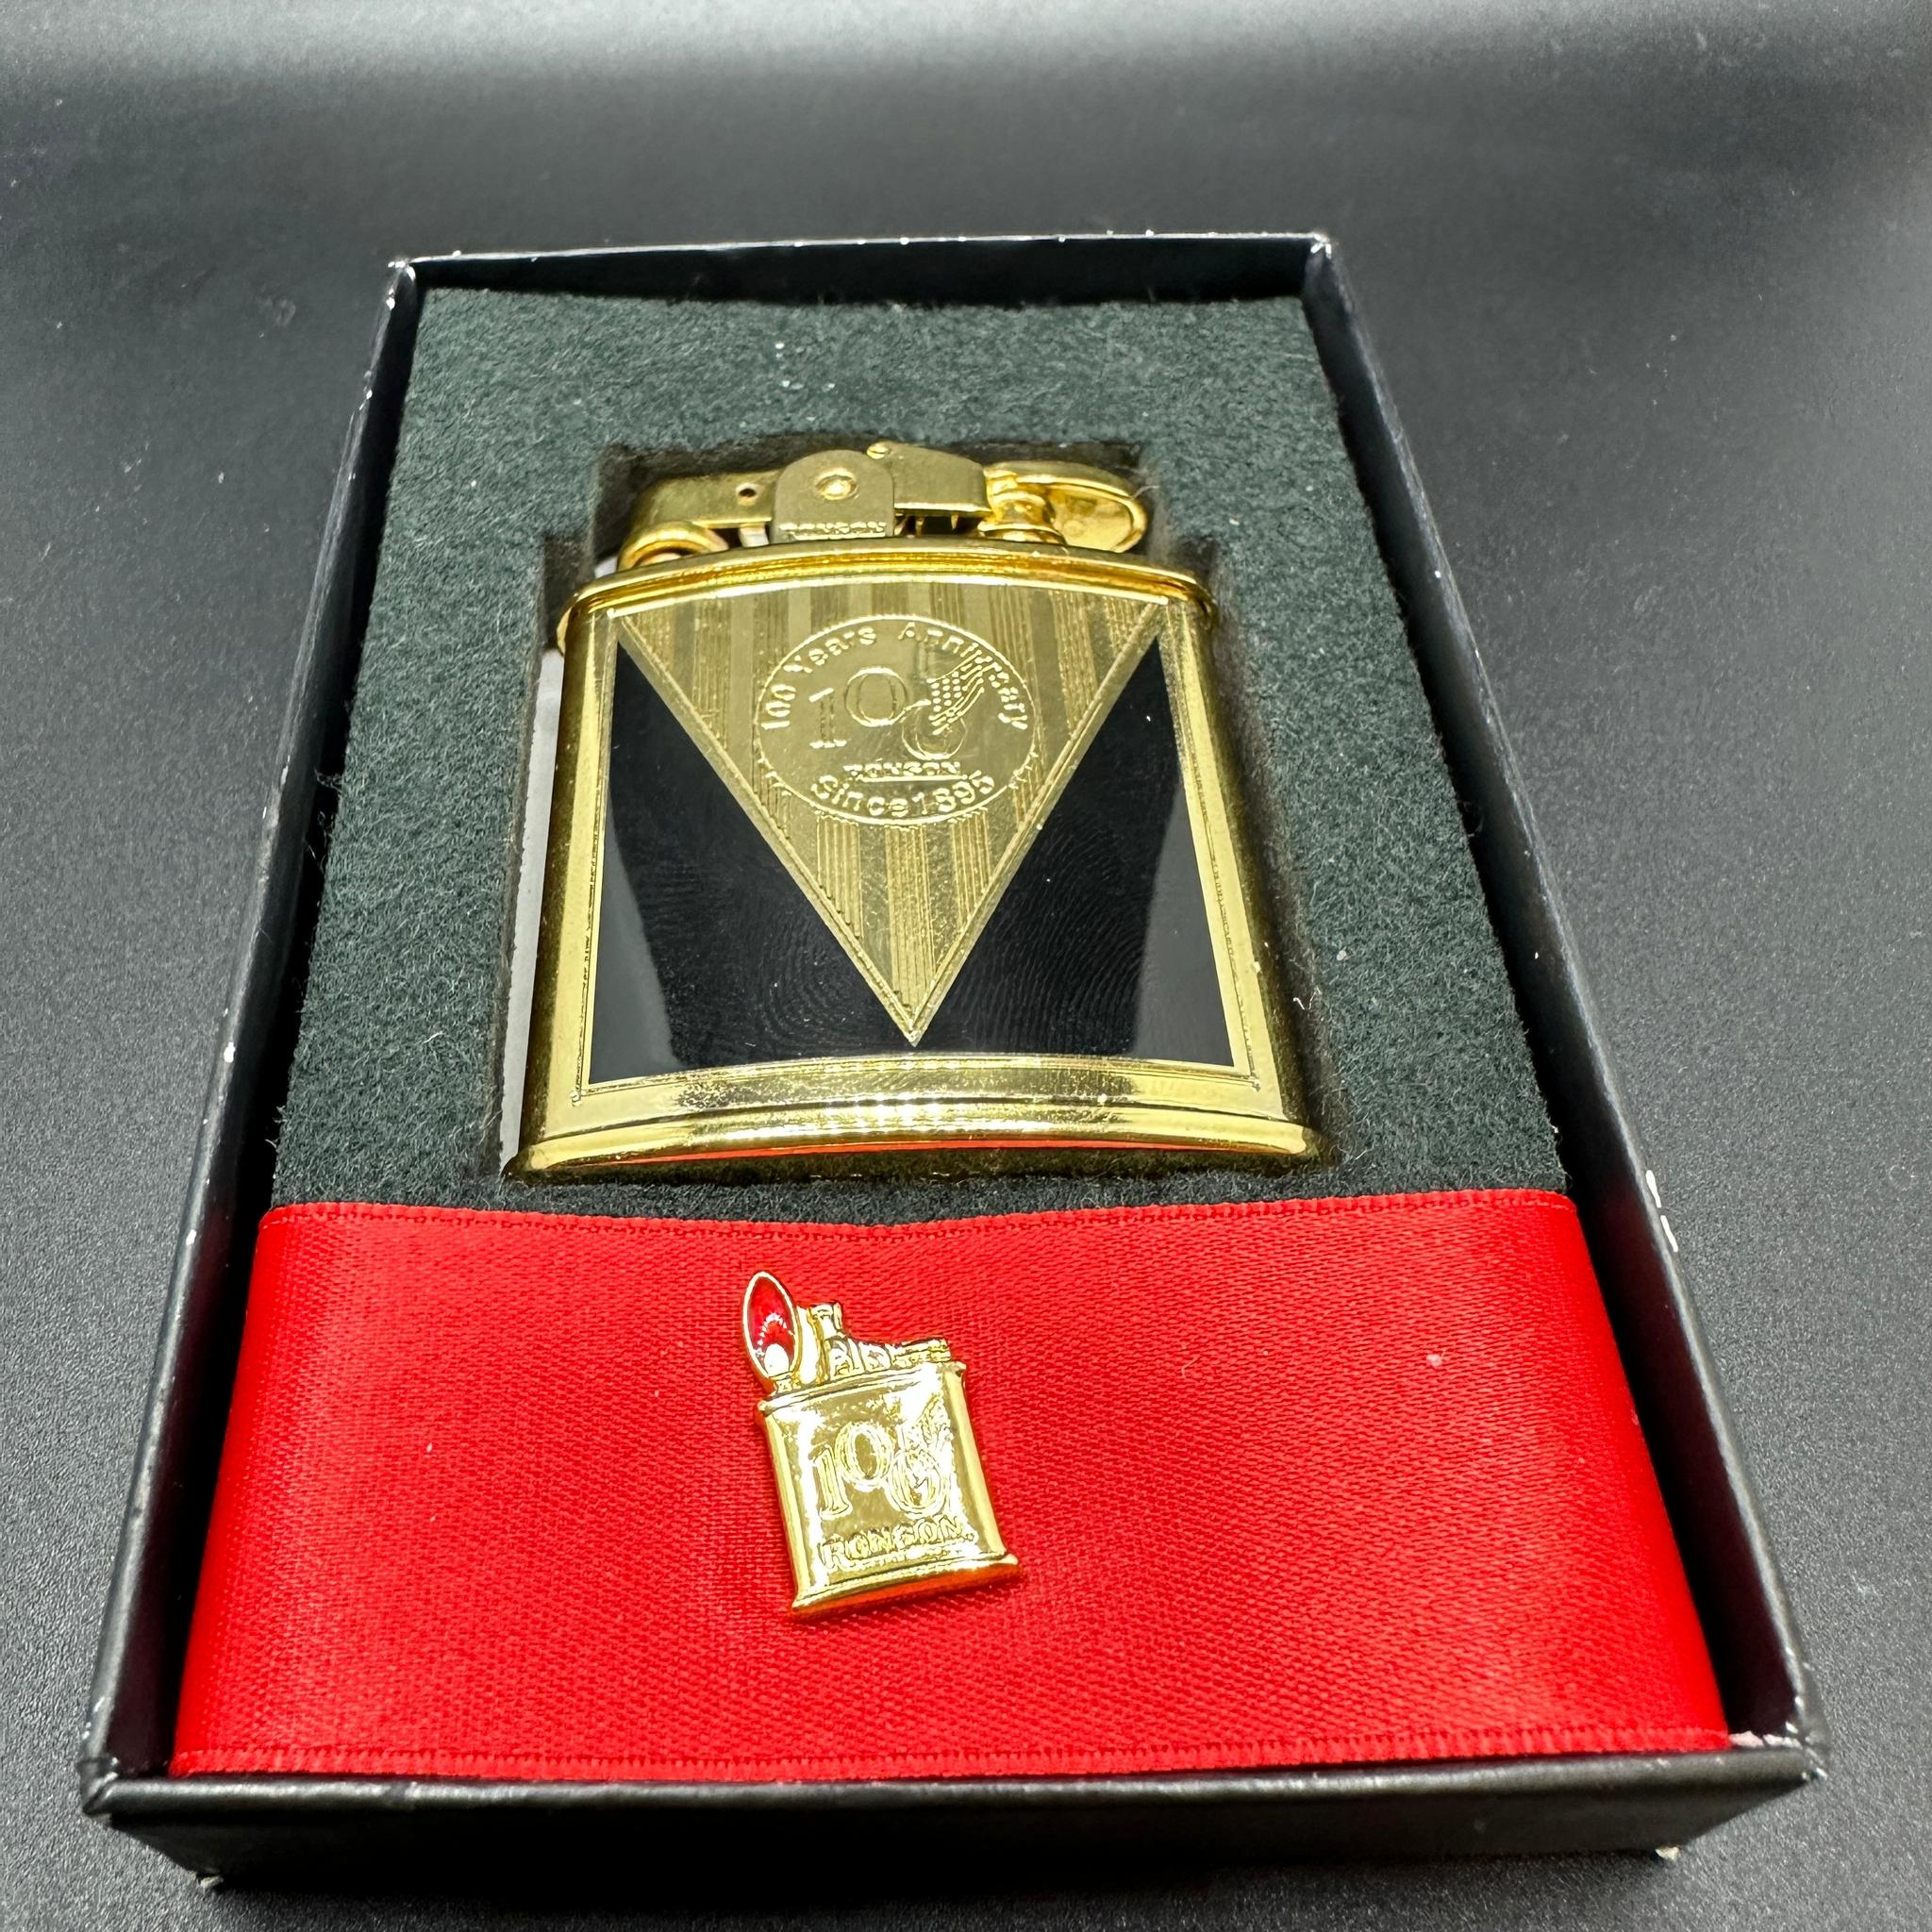 Women's or Men's Gold Plated “1943” Ronson Lighter, Rare Limited 100 Year Anniversary Edition For Sale